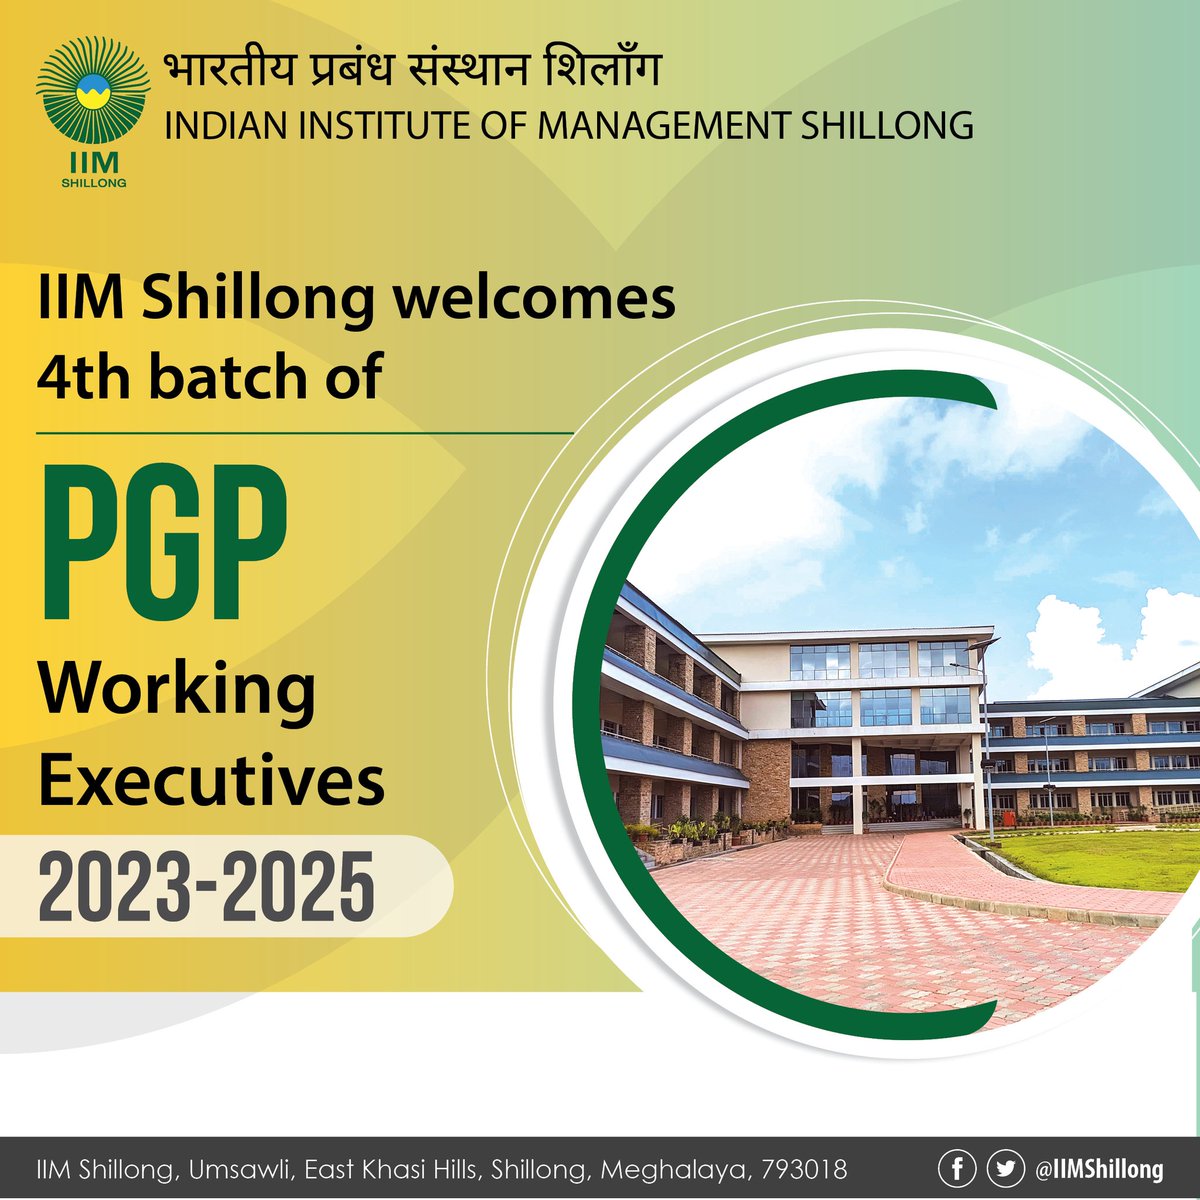 36 experienced professionals have enrolled in the 4th batch of the 2-year PGP for Working Executives.

#IIM #IIMS #ExecutiveMBA #EMBA #PGP